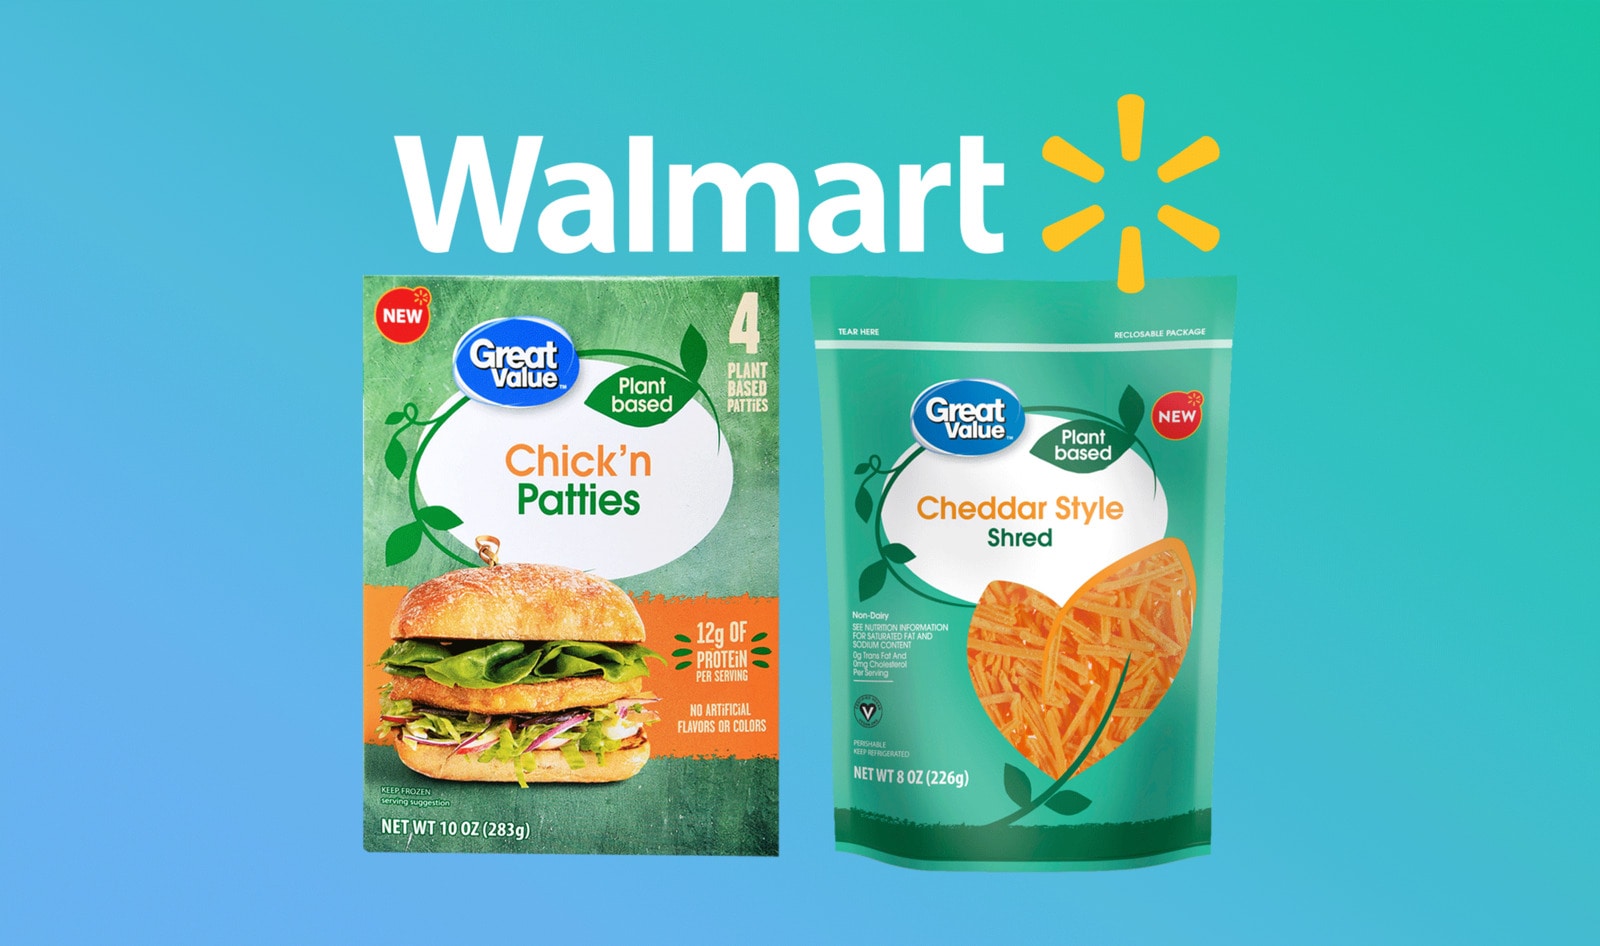 Walmart Ups Sustainable Food Options With Vegan Chicken and Cheese